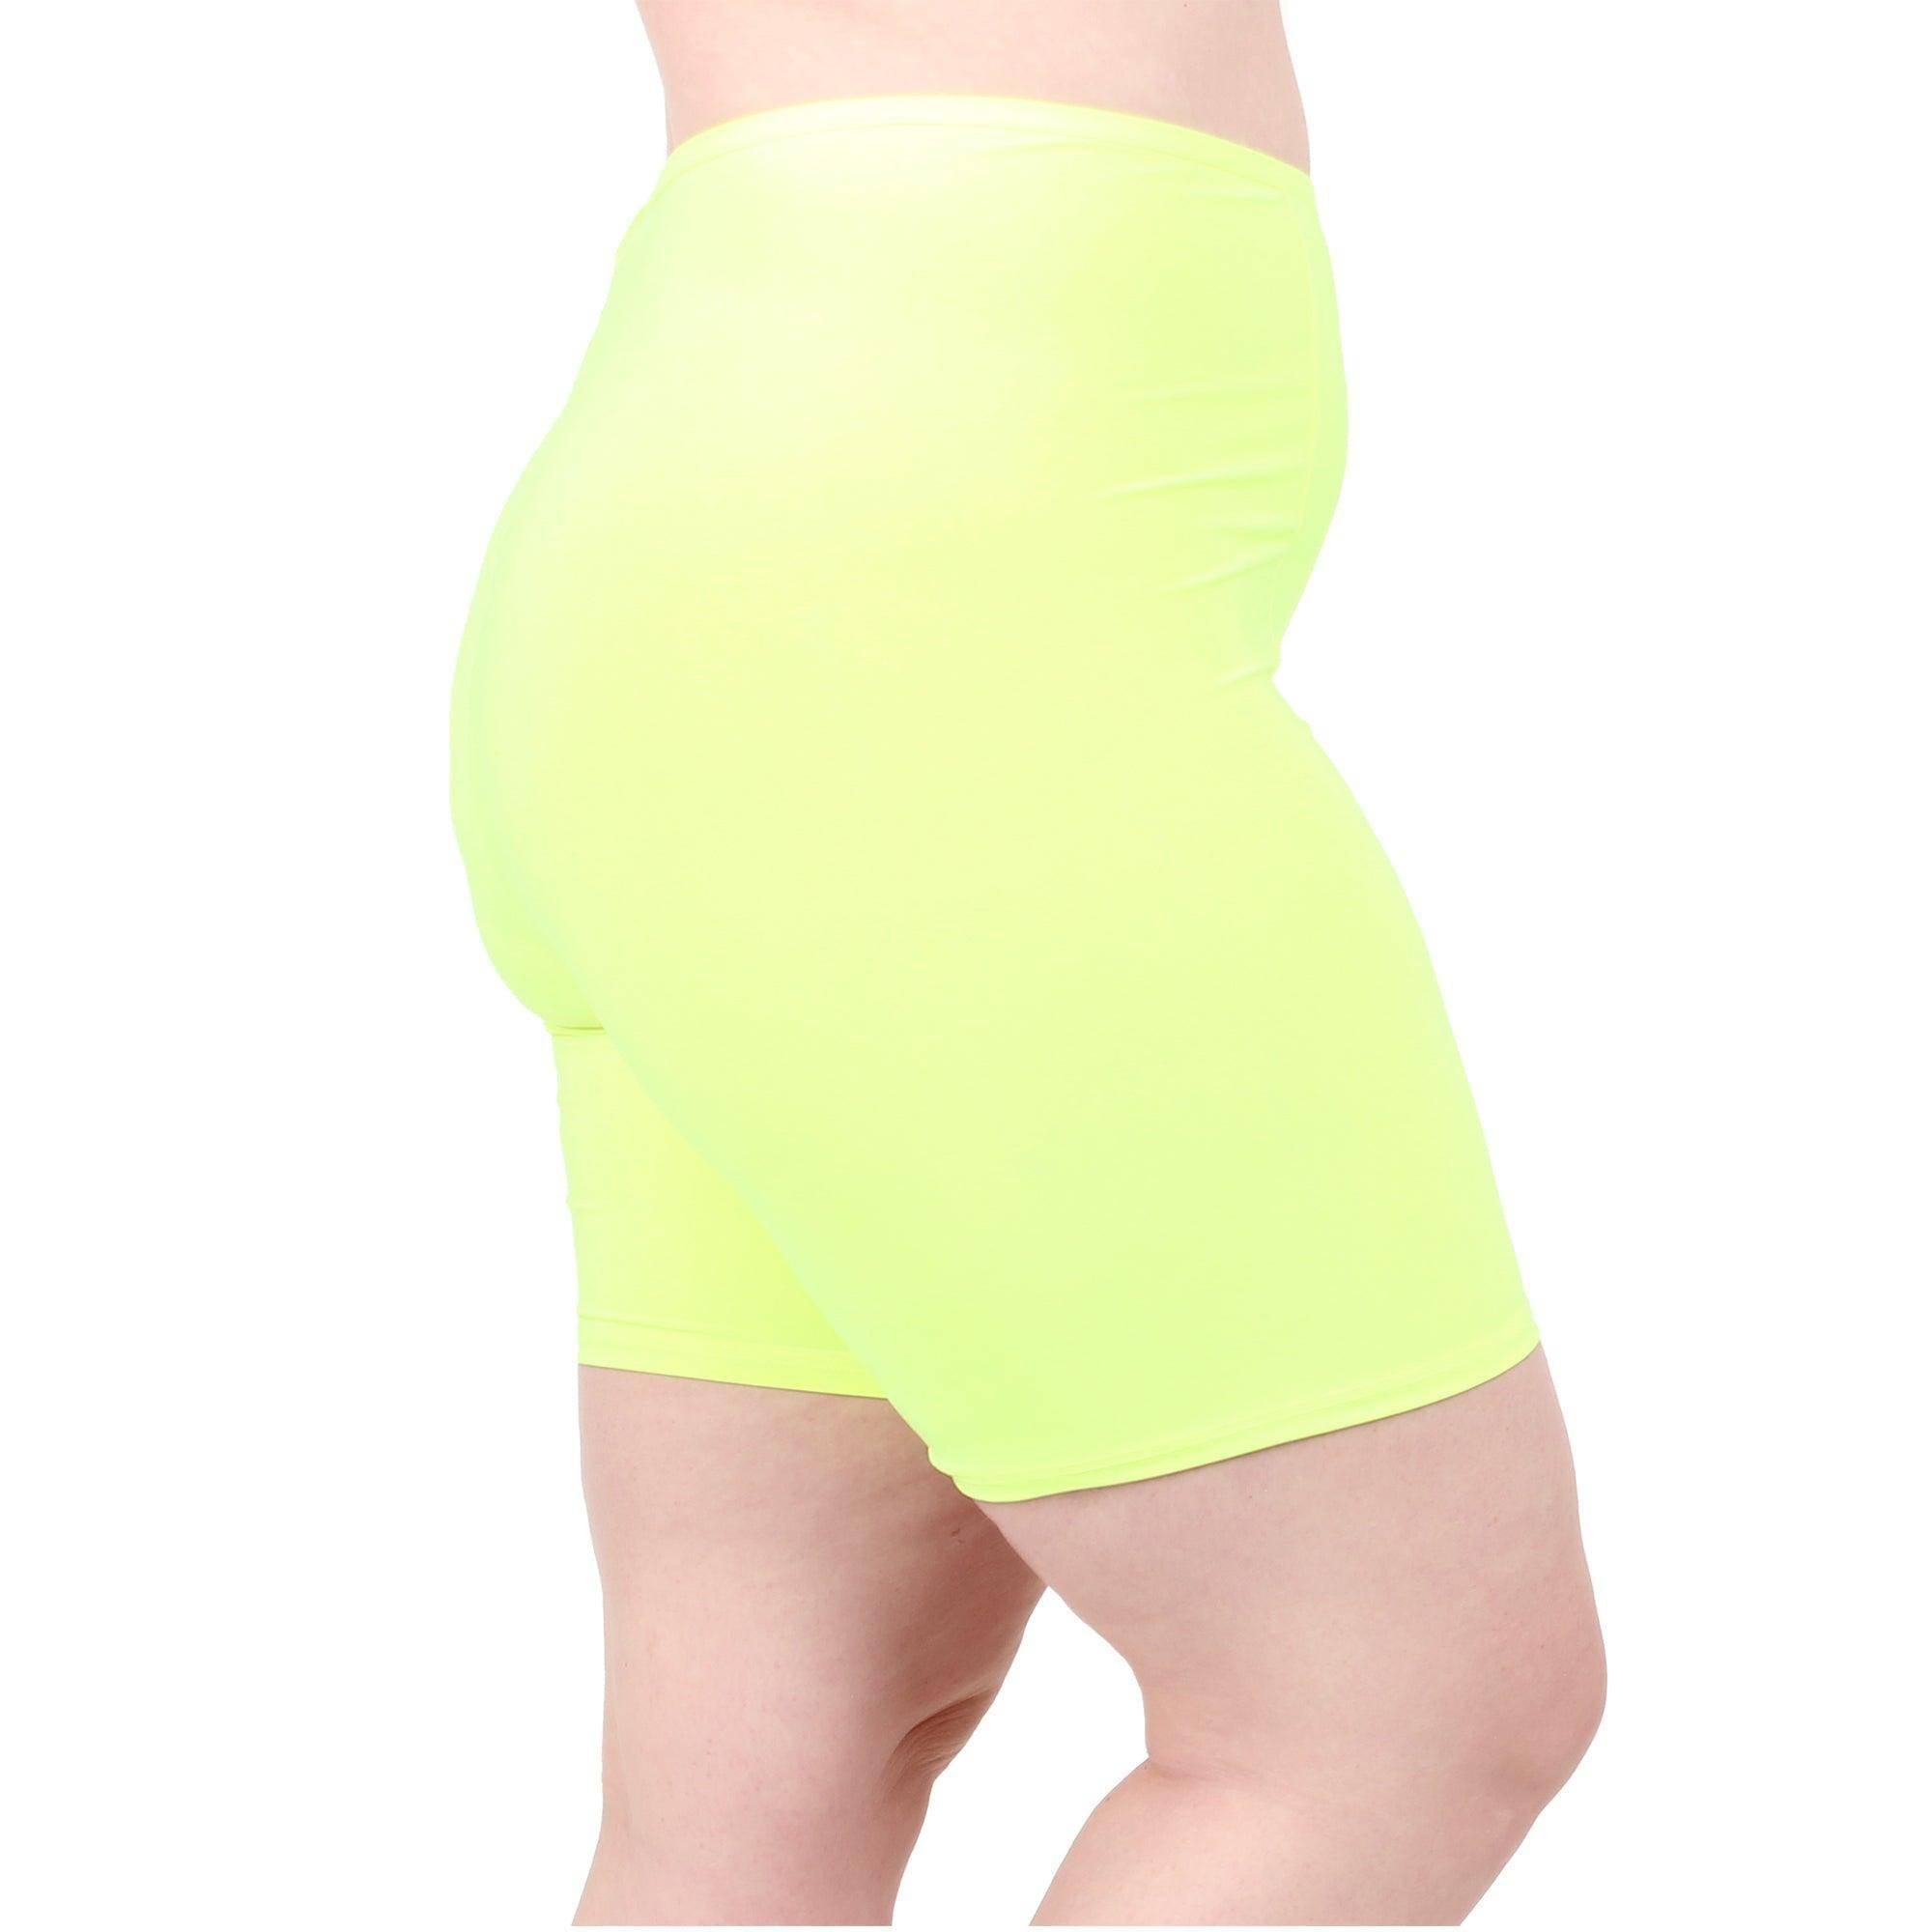 Undersummers Fusion High Waist Slip Short, Thigh Anti Chafing Shorts Women,  Slip Shorts for Women Under Dress, Undergarments for dresses, 7” (Small,  Black) at  Women's Clothing store